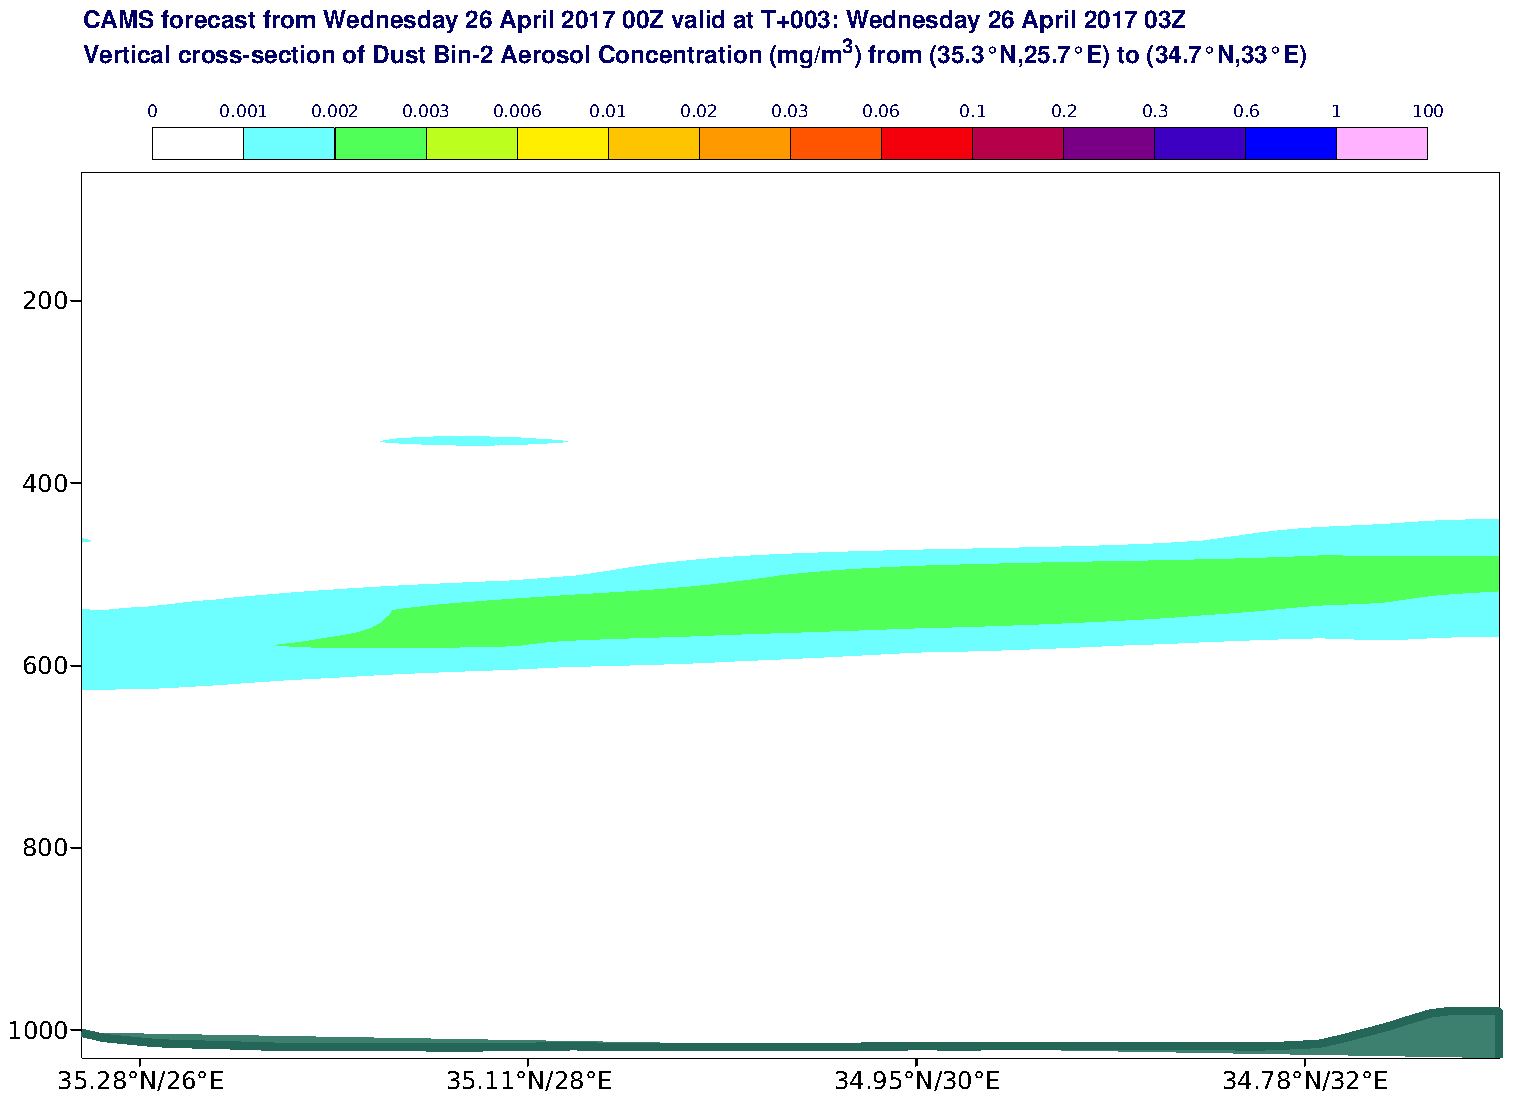 Vertical cross-section of Dust Bin-2 Aerosol Concentration (mg/m3) valid at T3 - 2017-04-26 03:00